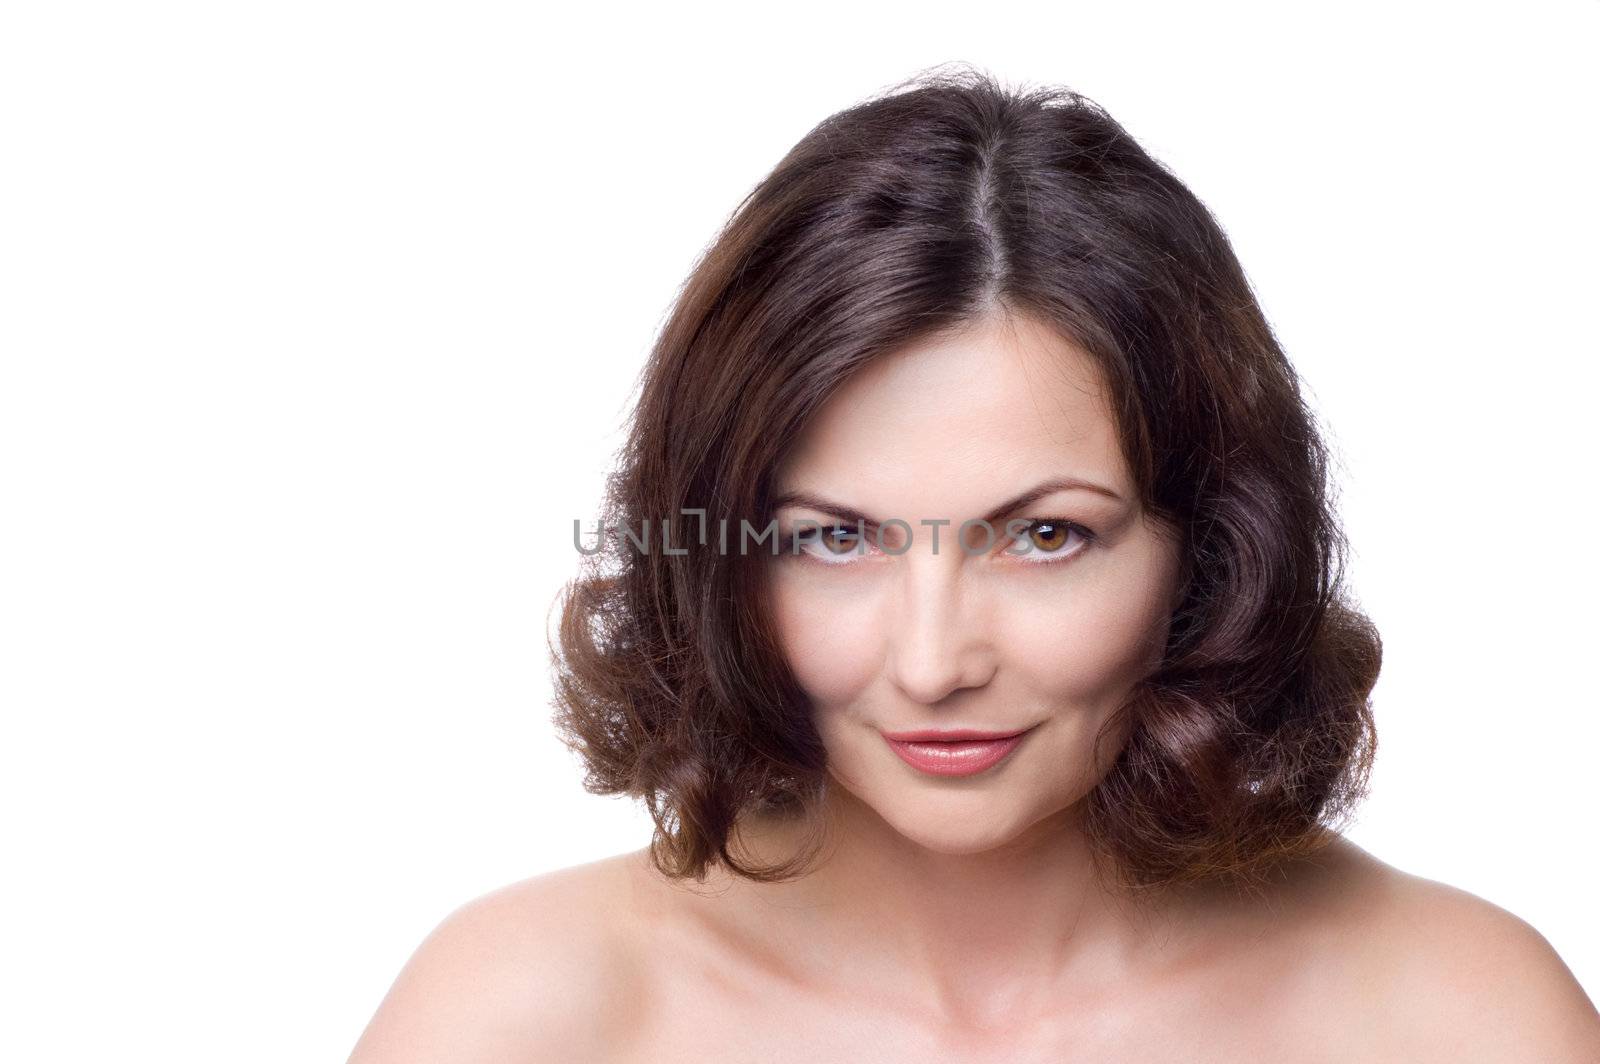 beautiful middle-aged woman by starush